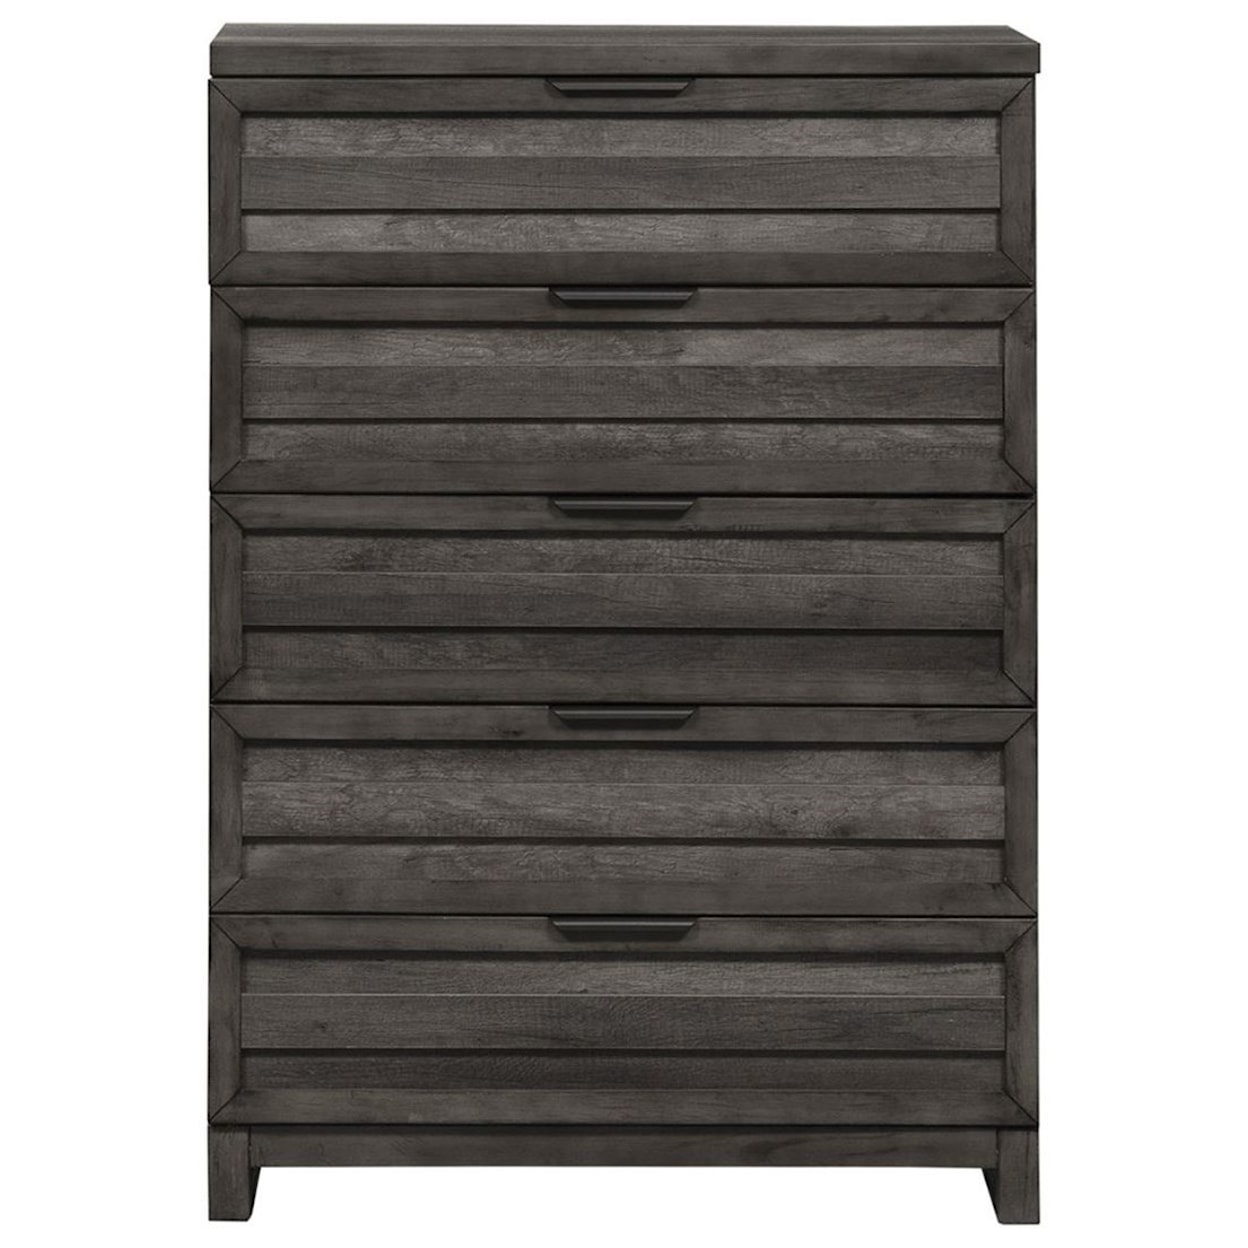 Liberty Furniture Tanners Creek 5-Drawer Bedroom Chest